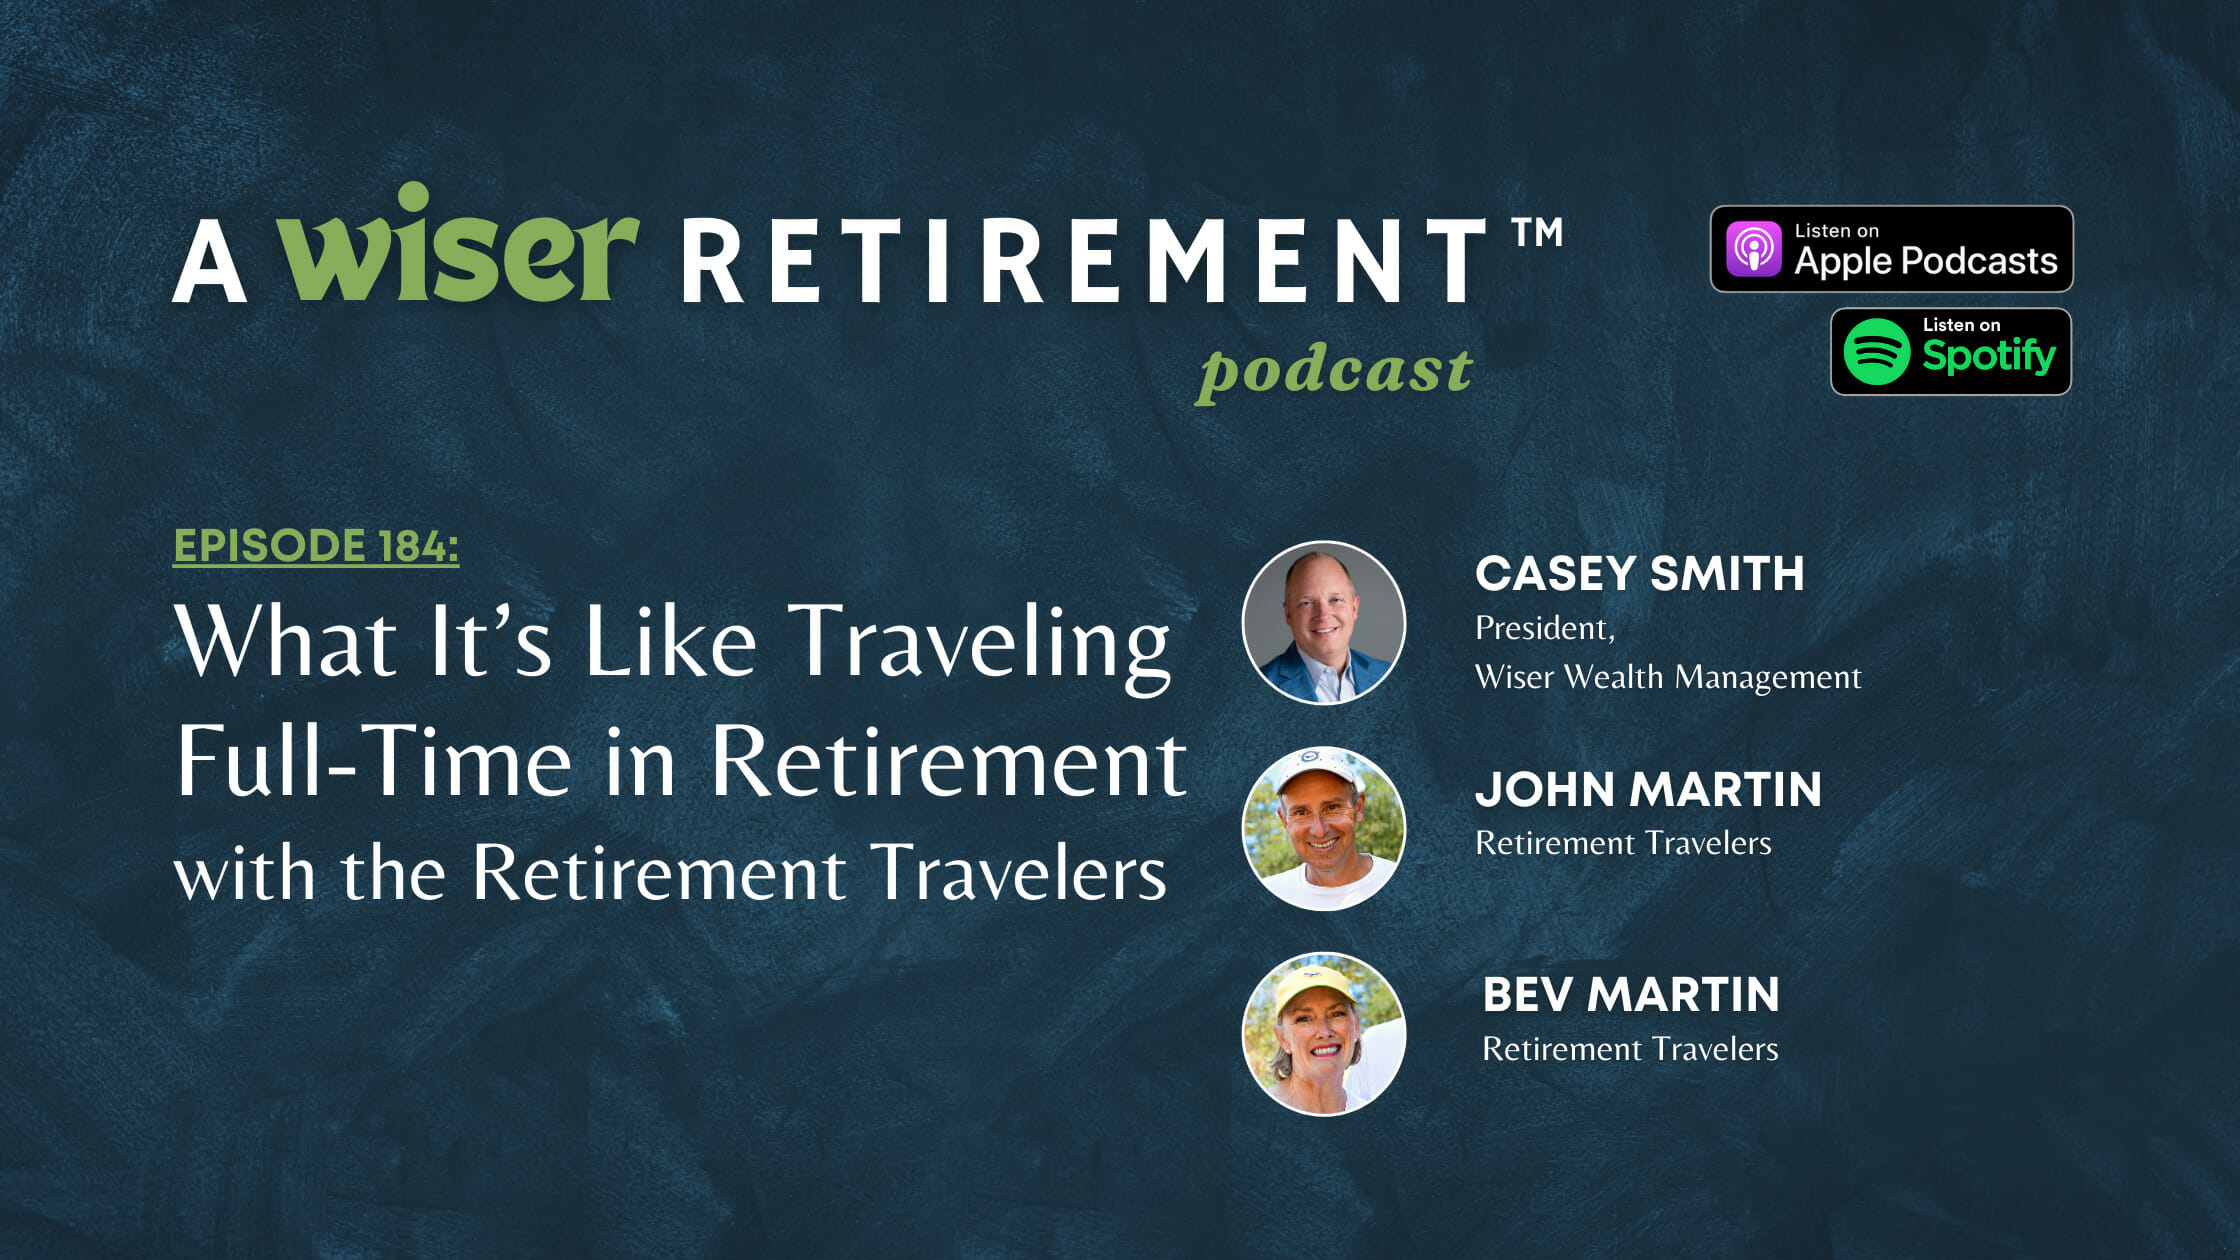 What It’s Like Traveling Full-Time in Retirement with the Retirement Travelers